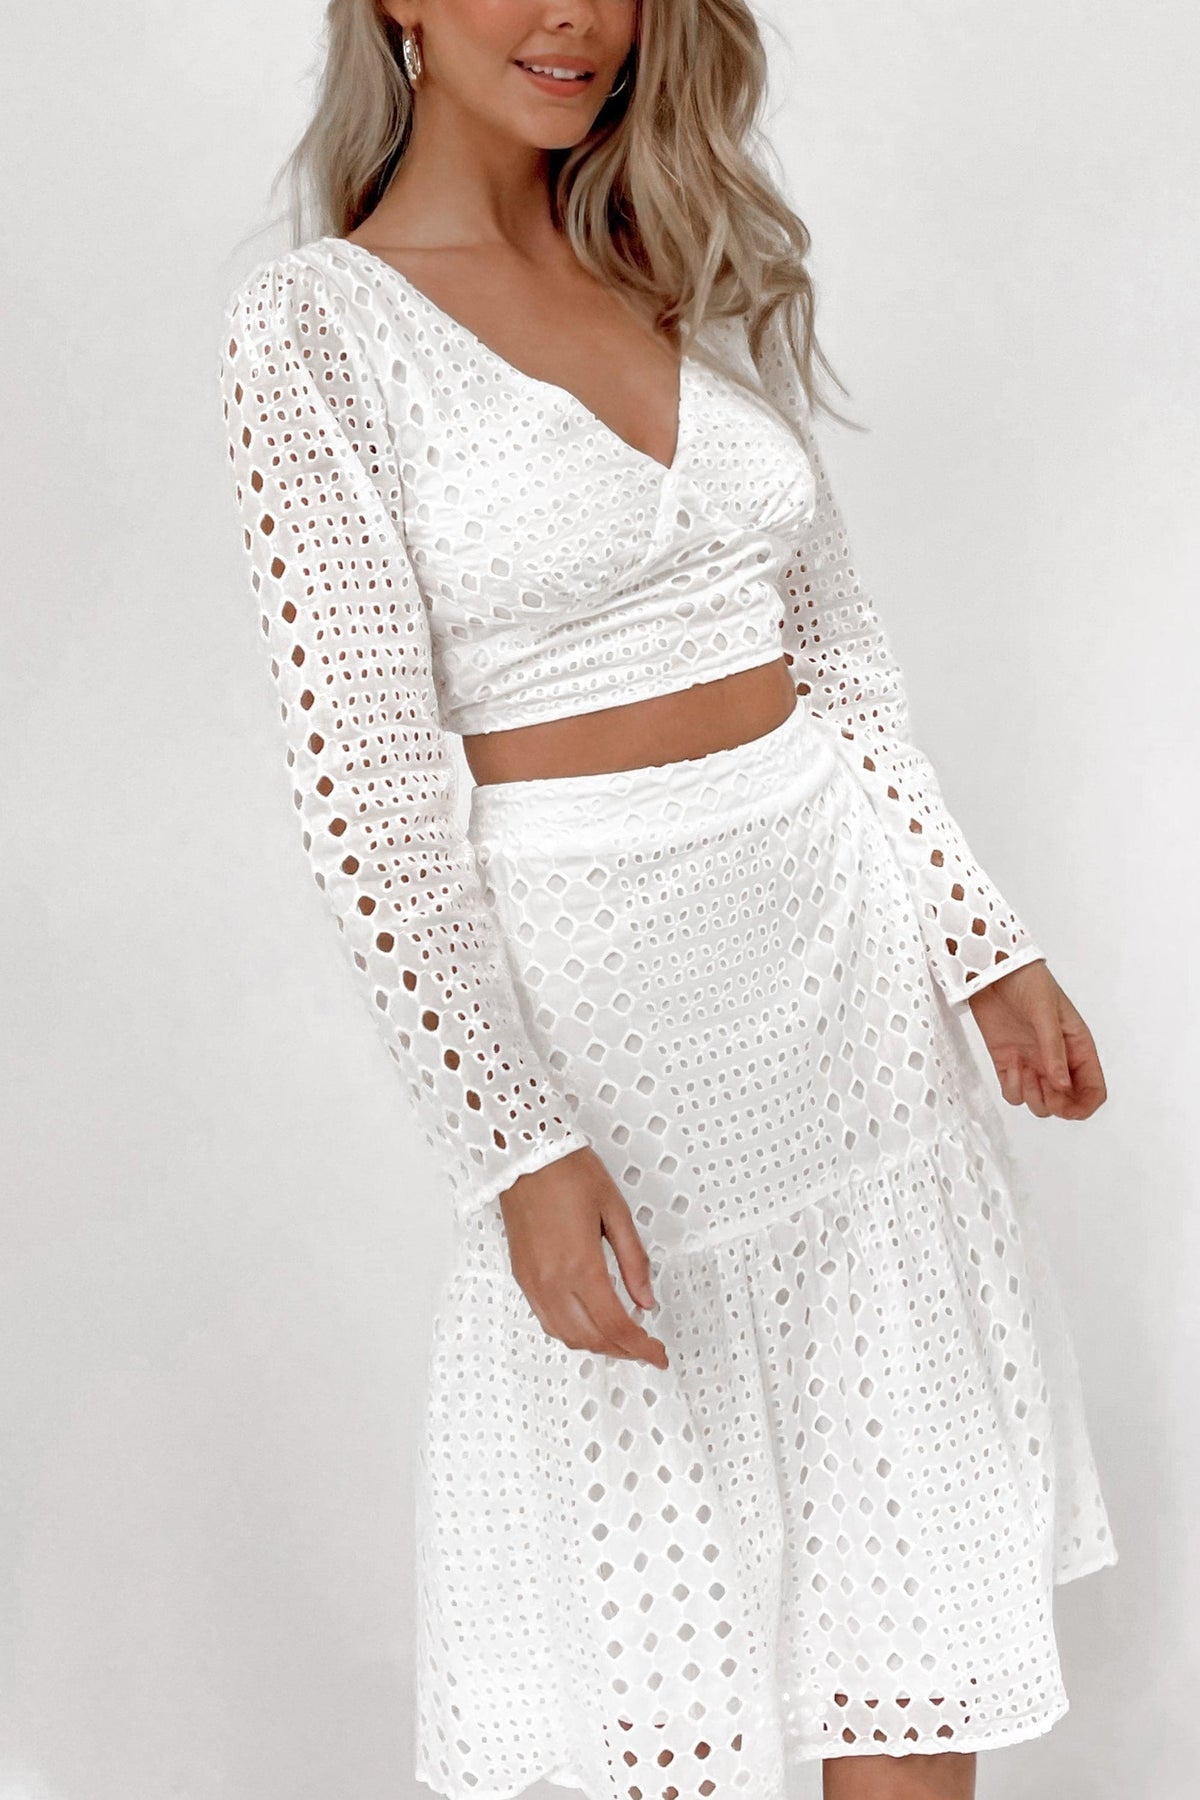 Pay Attention Skirt, BOTTOMS, COTTON, MIDI SKIRT, NEW ARRIVALS, Sale, SKIRTS, WHITE, Shop The Latest Pay Attention Skirt Only 60.00 from MISHKAH FASHION:, Our New Pay Attention Skirt is only $61.00-We Have The Latest Pants | Shorts | Skirts @ Mishkah Online Fashion Boutique-MISHKAH